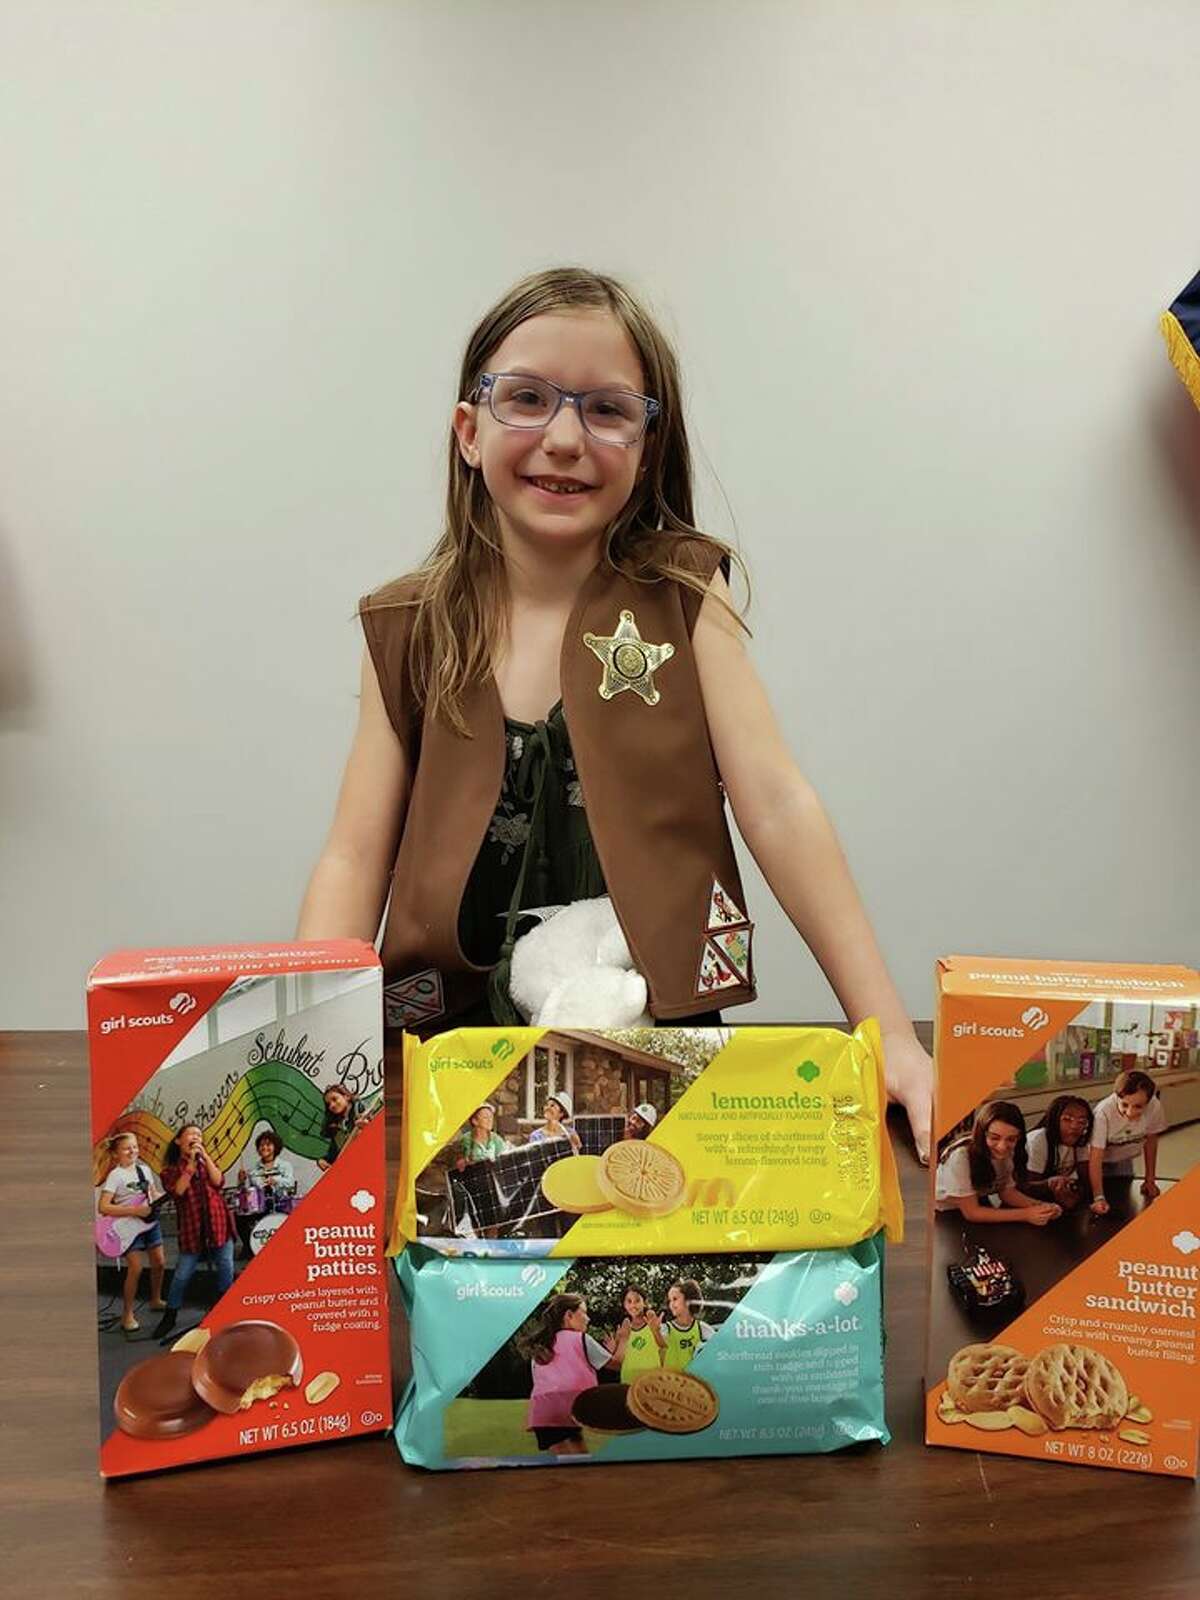 Eleanor Holbrook, 8, representing Girl Scout Troop 27137 donated about 42 boxes of assorted cookies to the office. Her brother, sister and mother, Amy, assisted her with the special delivery, according to the post.